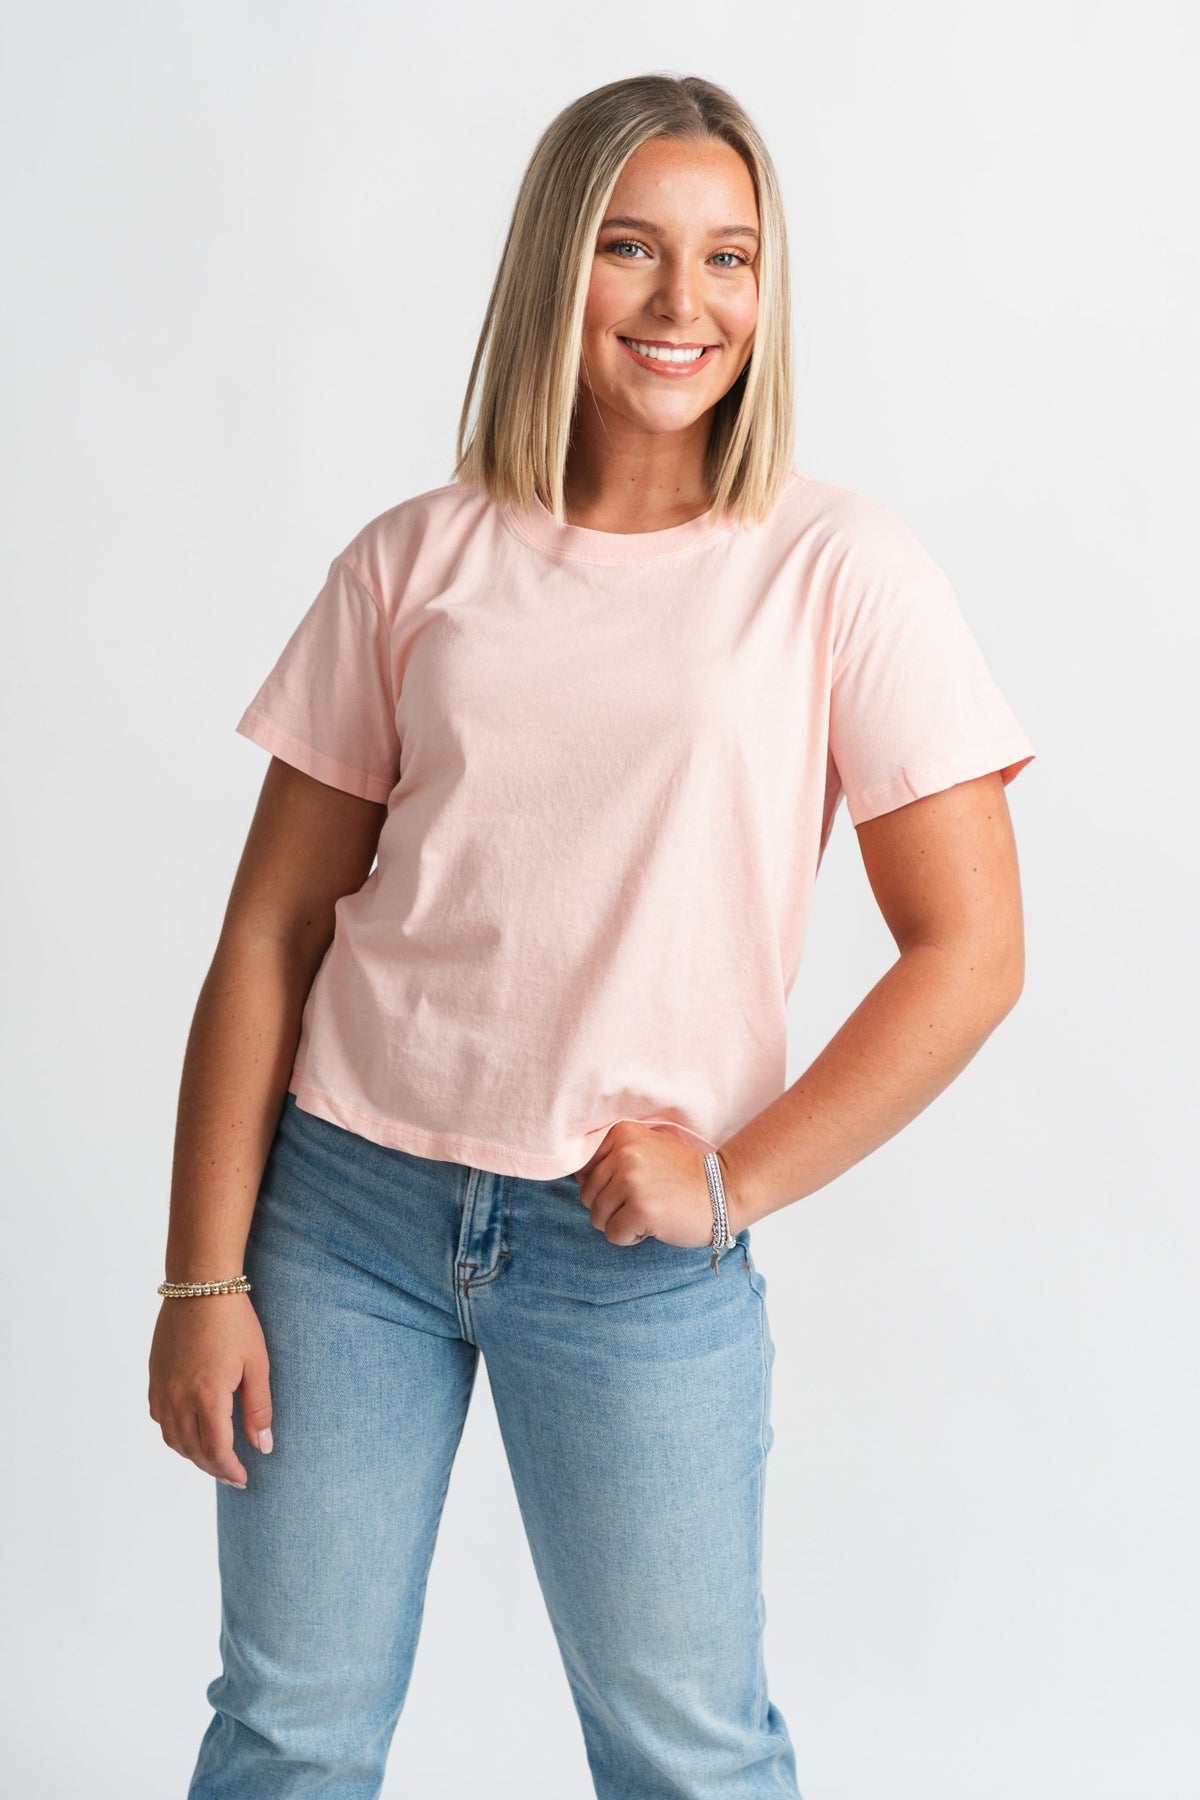 Z Supply go to basic tee pink lemonade - Z Supply T-shirts - Z Supply Tops, Dresses, Tanks, Tees, Cardigans, Joggers and Loungewear at Lush Fashion Lounge